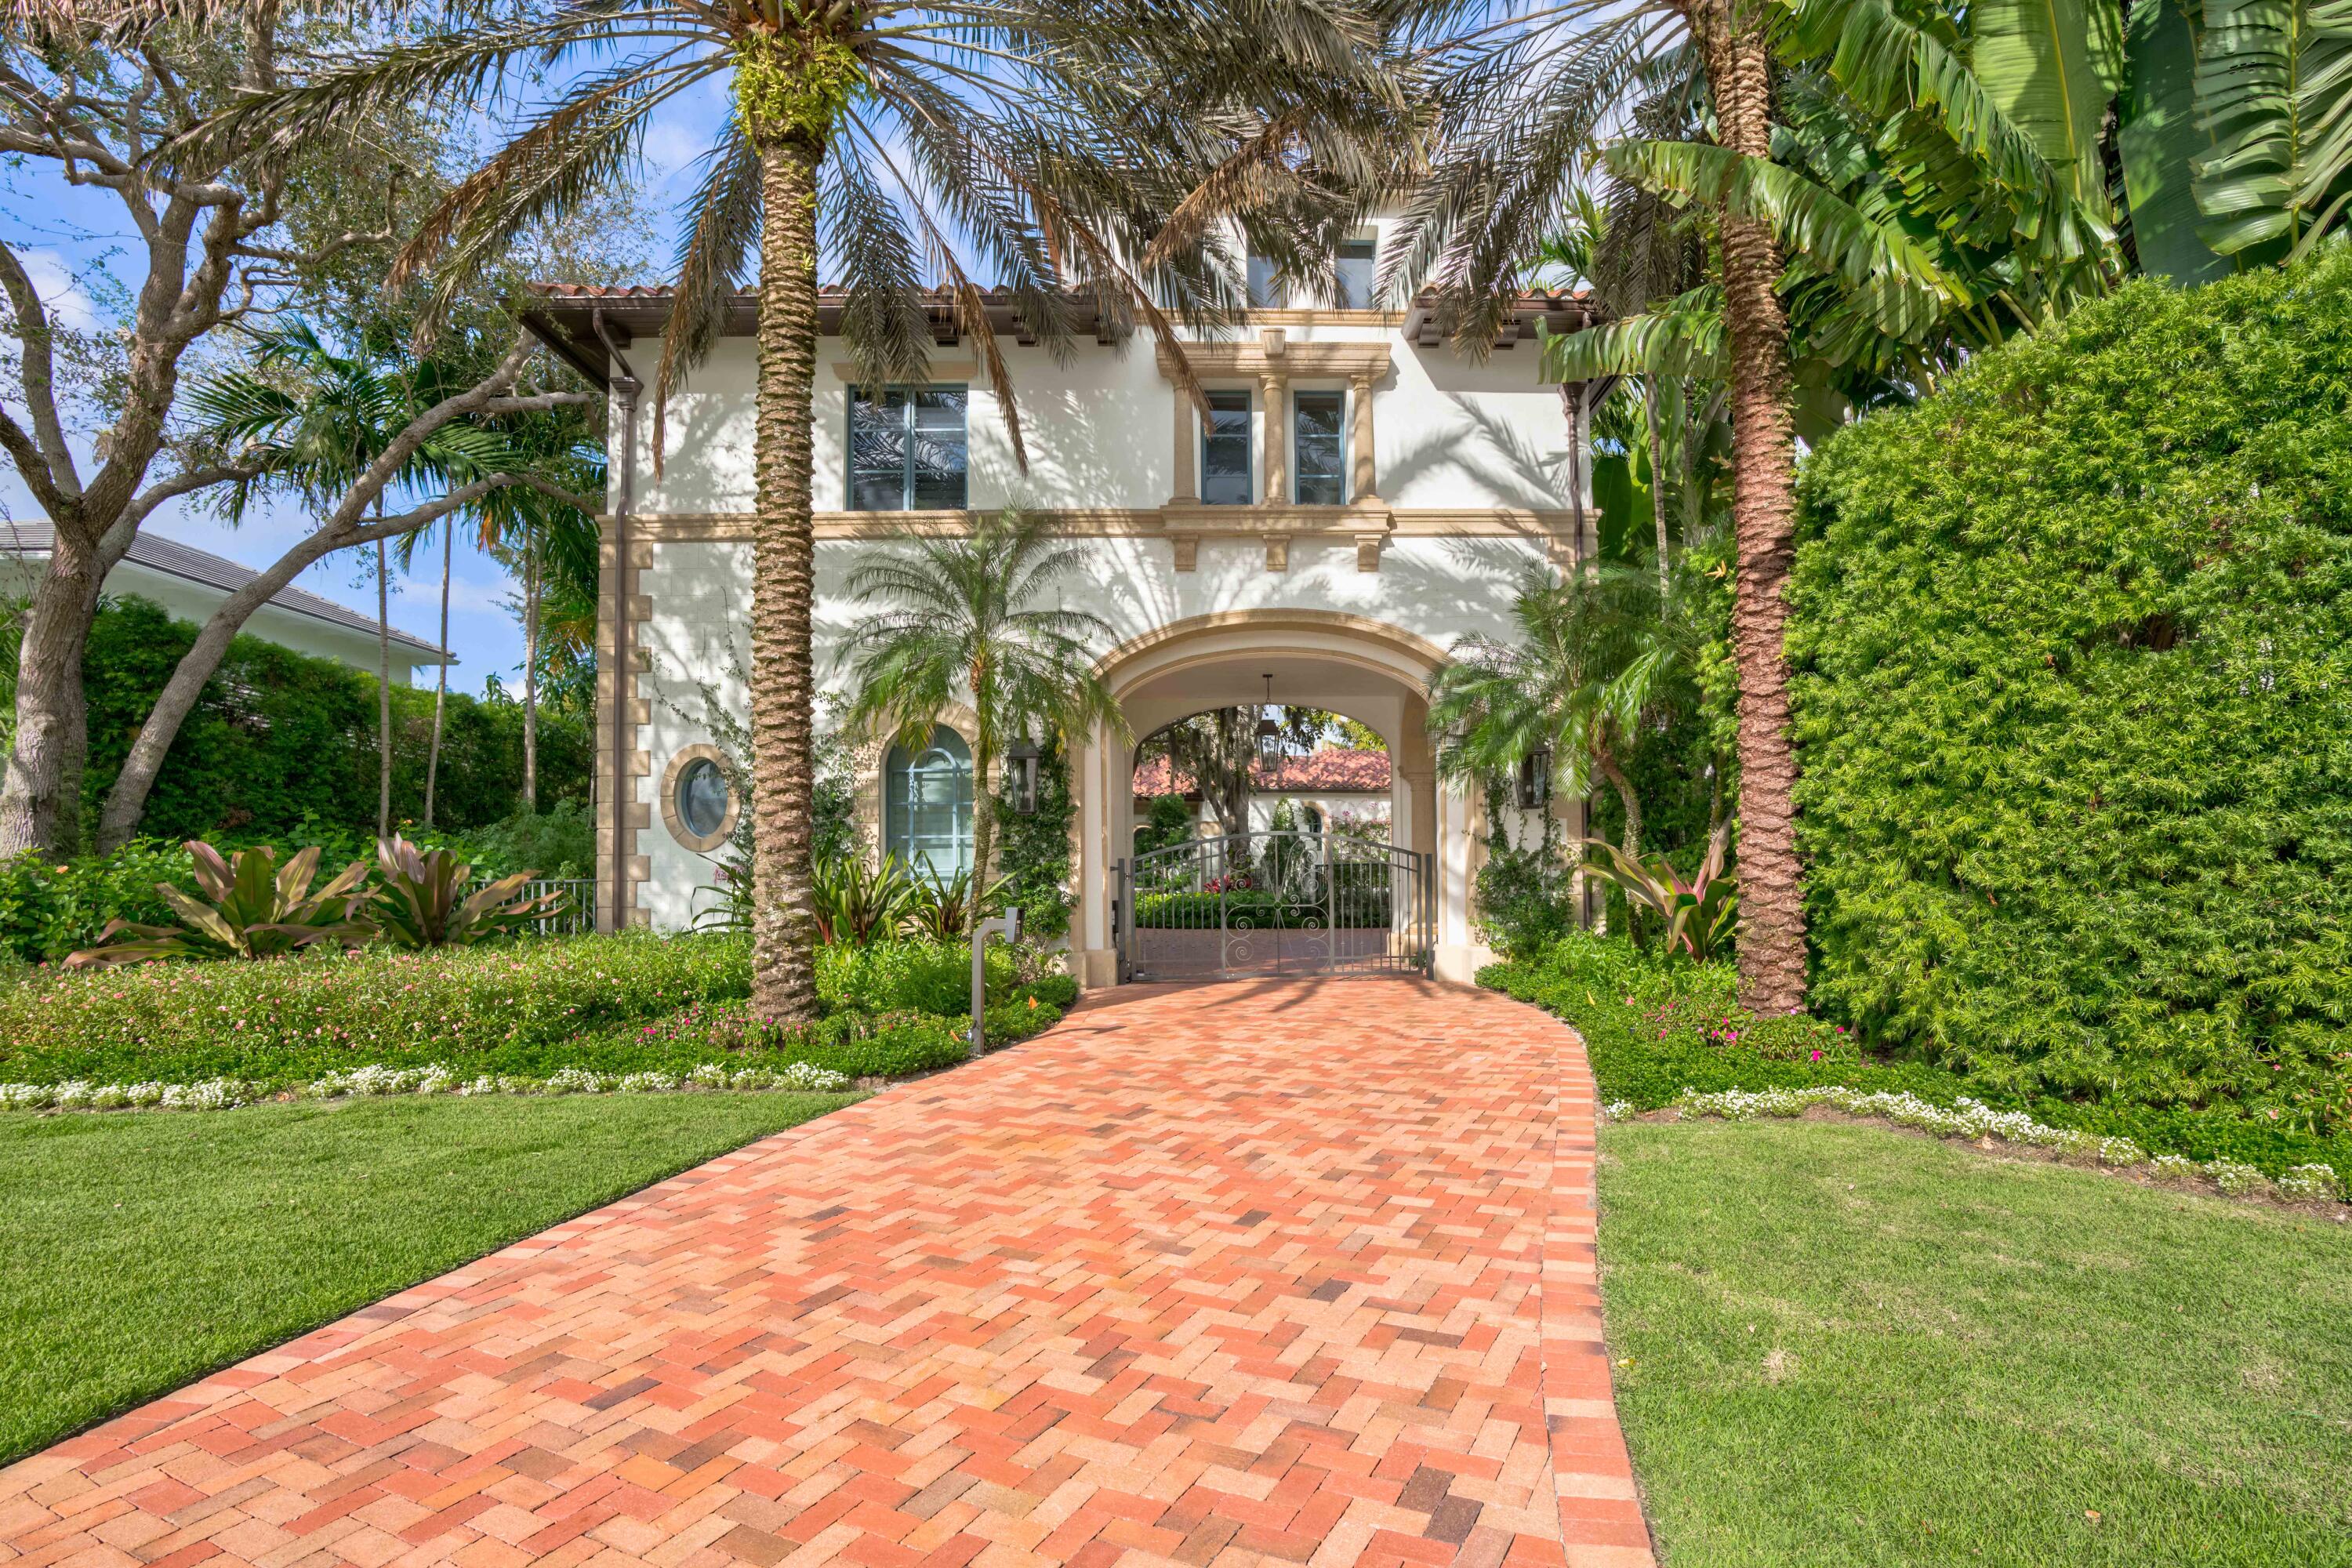 To see is to believe... 11759 Elina Ct is a stunning, private custom gated estate in the exclusive Old Palm Golf Club. A 12,000+ sf home with 6 beds, 5.2 baths, and a 2 bedroom guest house are situated on the best lot in the community providing the most expansive view of the 9th hole Raymond Floyd designed course and elegant clubhouse.This home has gone under an extensive renovation and has been transformed into a current aesthetic beauty while maintaining its original European charm. All-new features include: landscaping and outdoor lighting, bathrooms, French oak flooring, decorative lighting, Lutron lighting package, AV and electrical system, pool, updated summer kitchen, installed phantom screens, garage flooring, and a security system. These are just a small taste of what has been